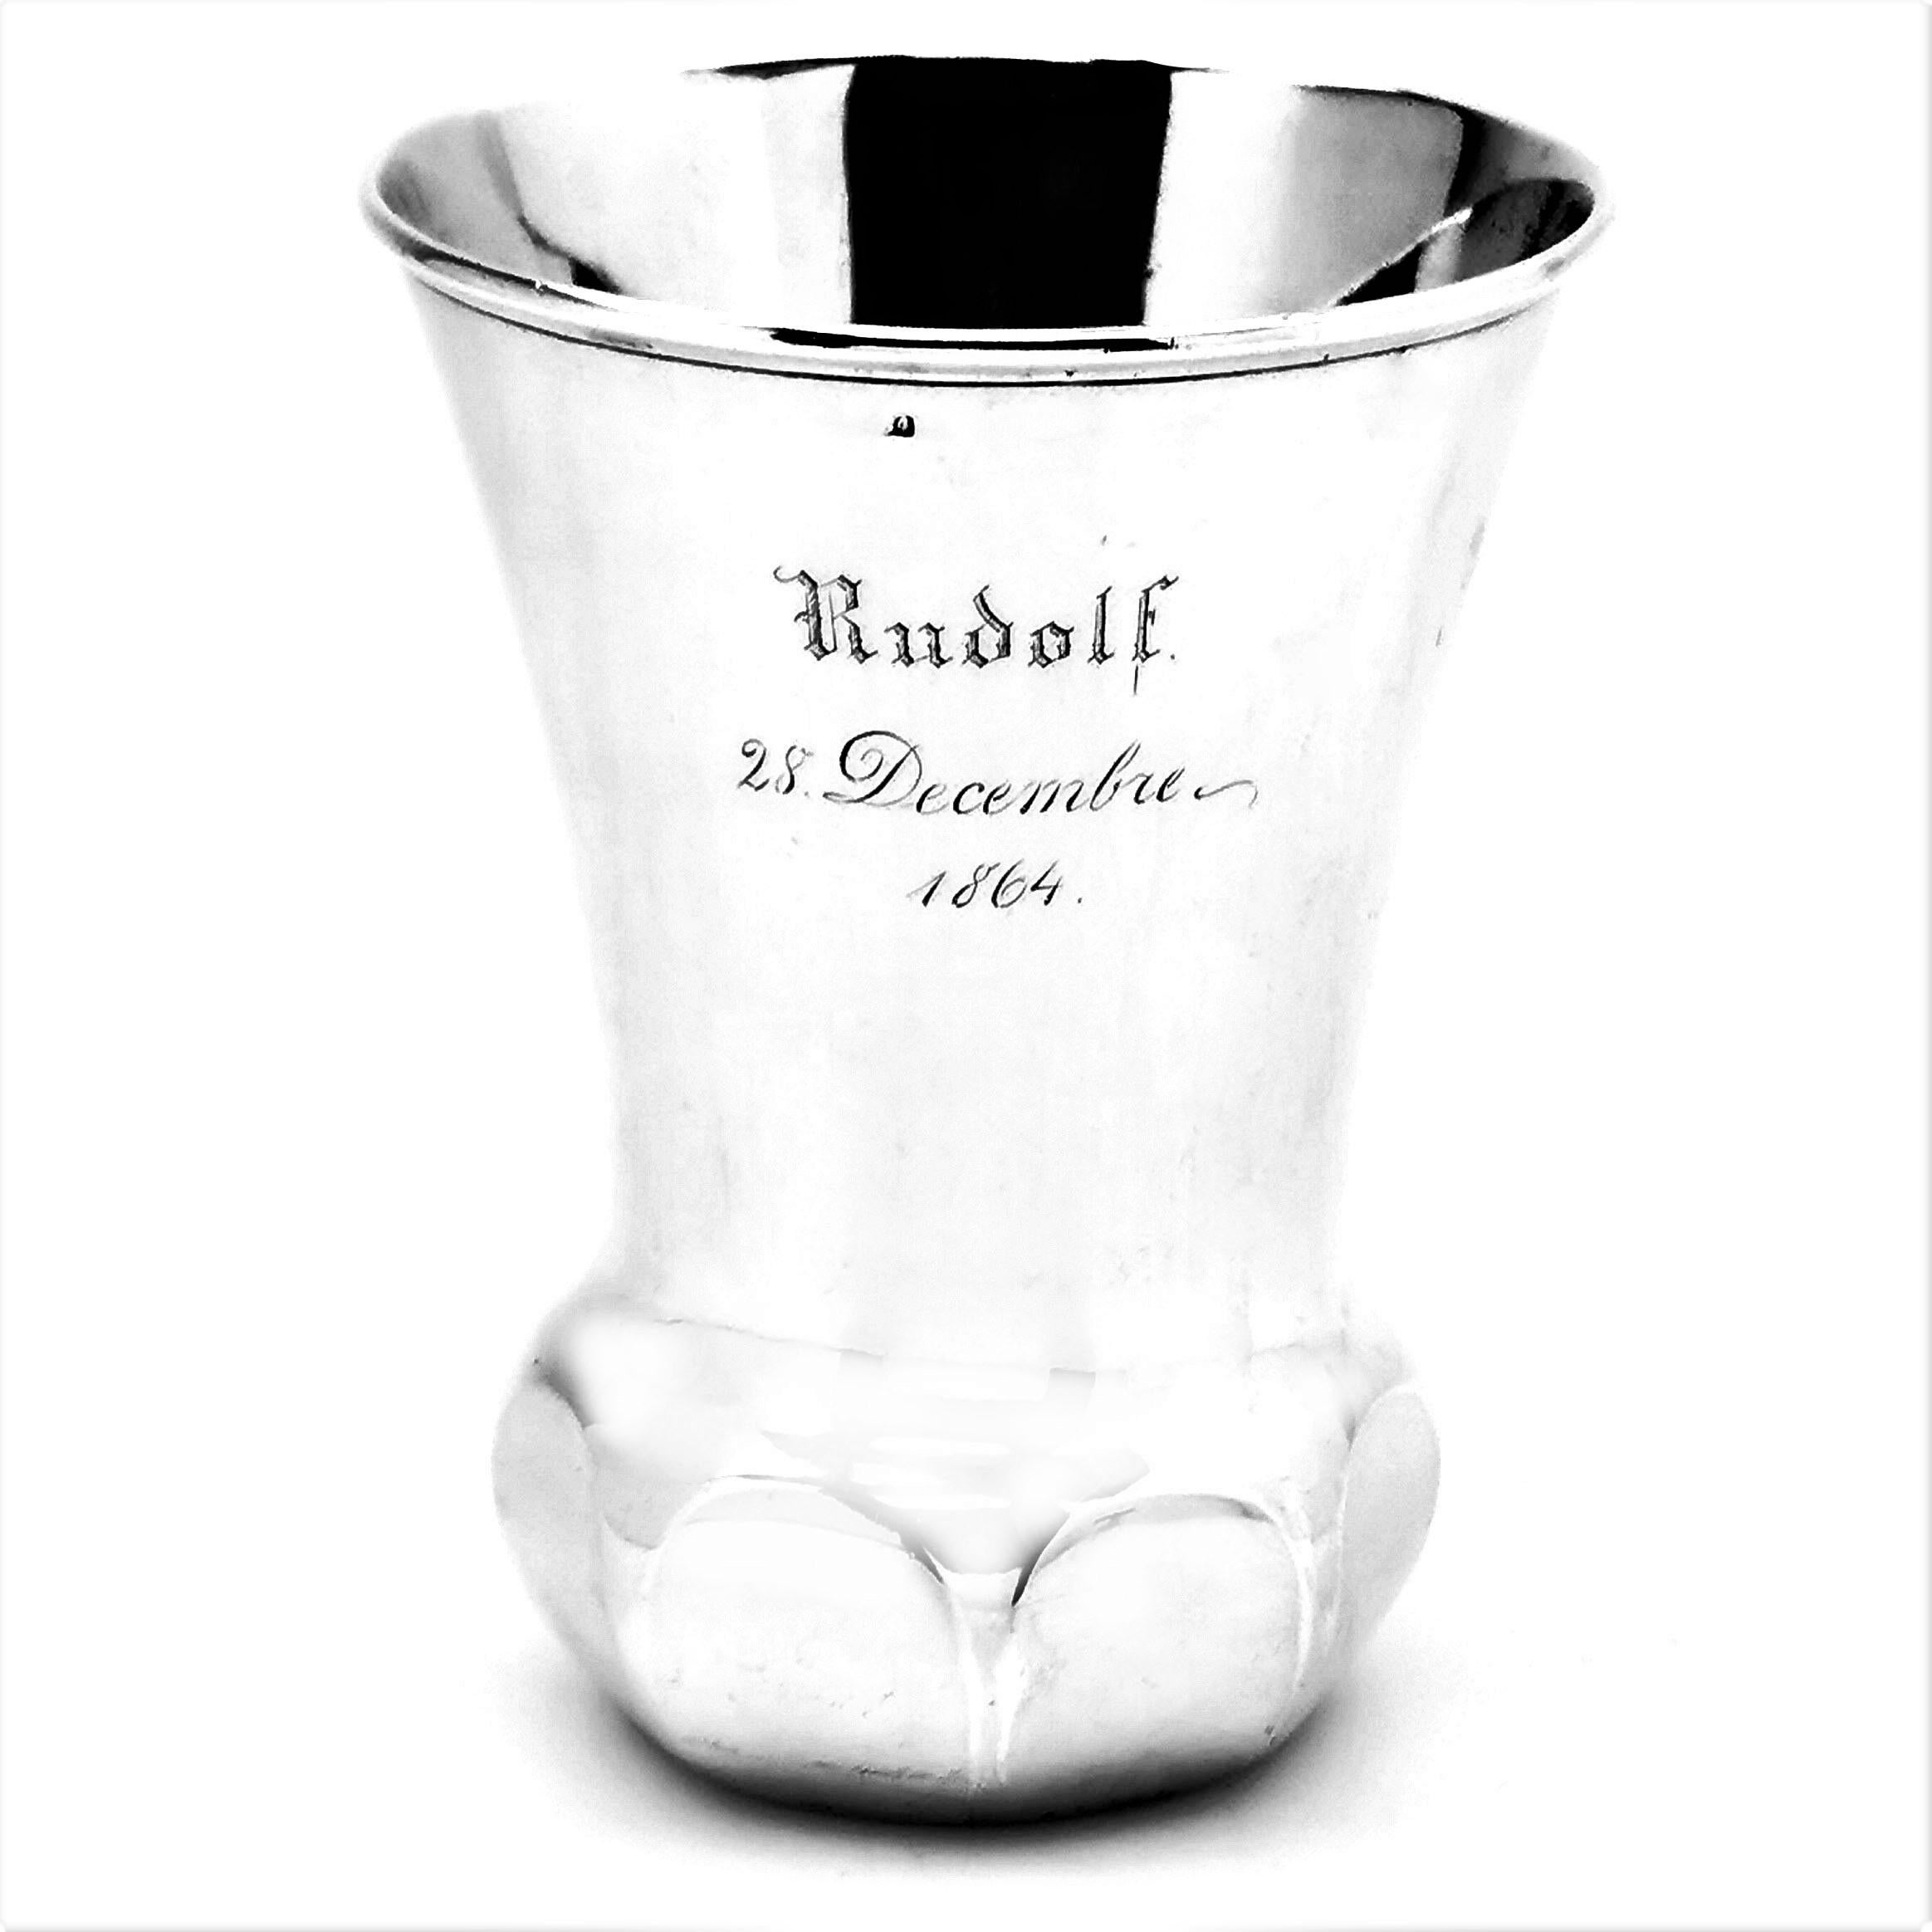 An exceptionally heavy antique Russian Alexander II solid Silver Beaker. The Beaker has a tapered cylindrical form supported by a panelled cylindrical base. The Beaker has an engraved crest on the one side including a count's coronet and on the